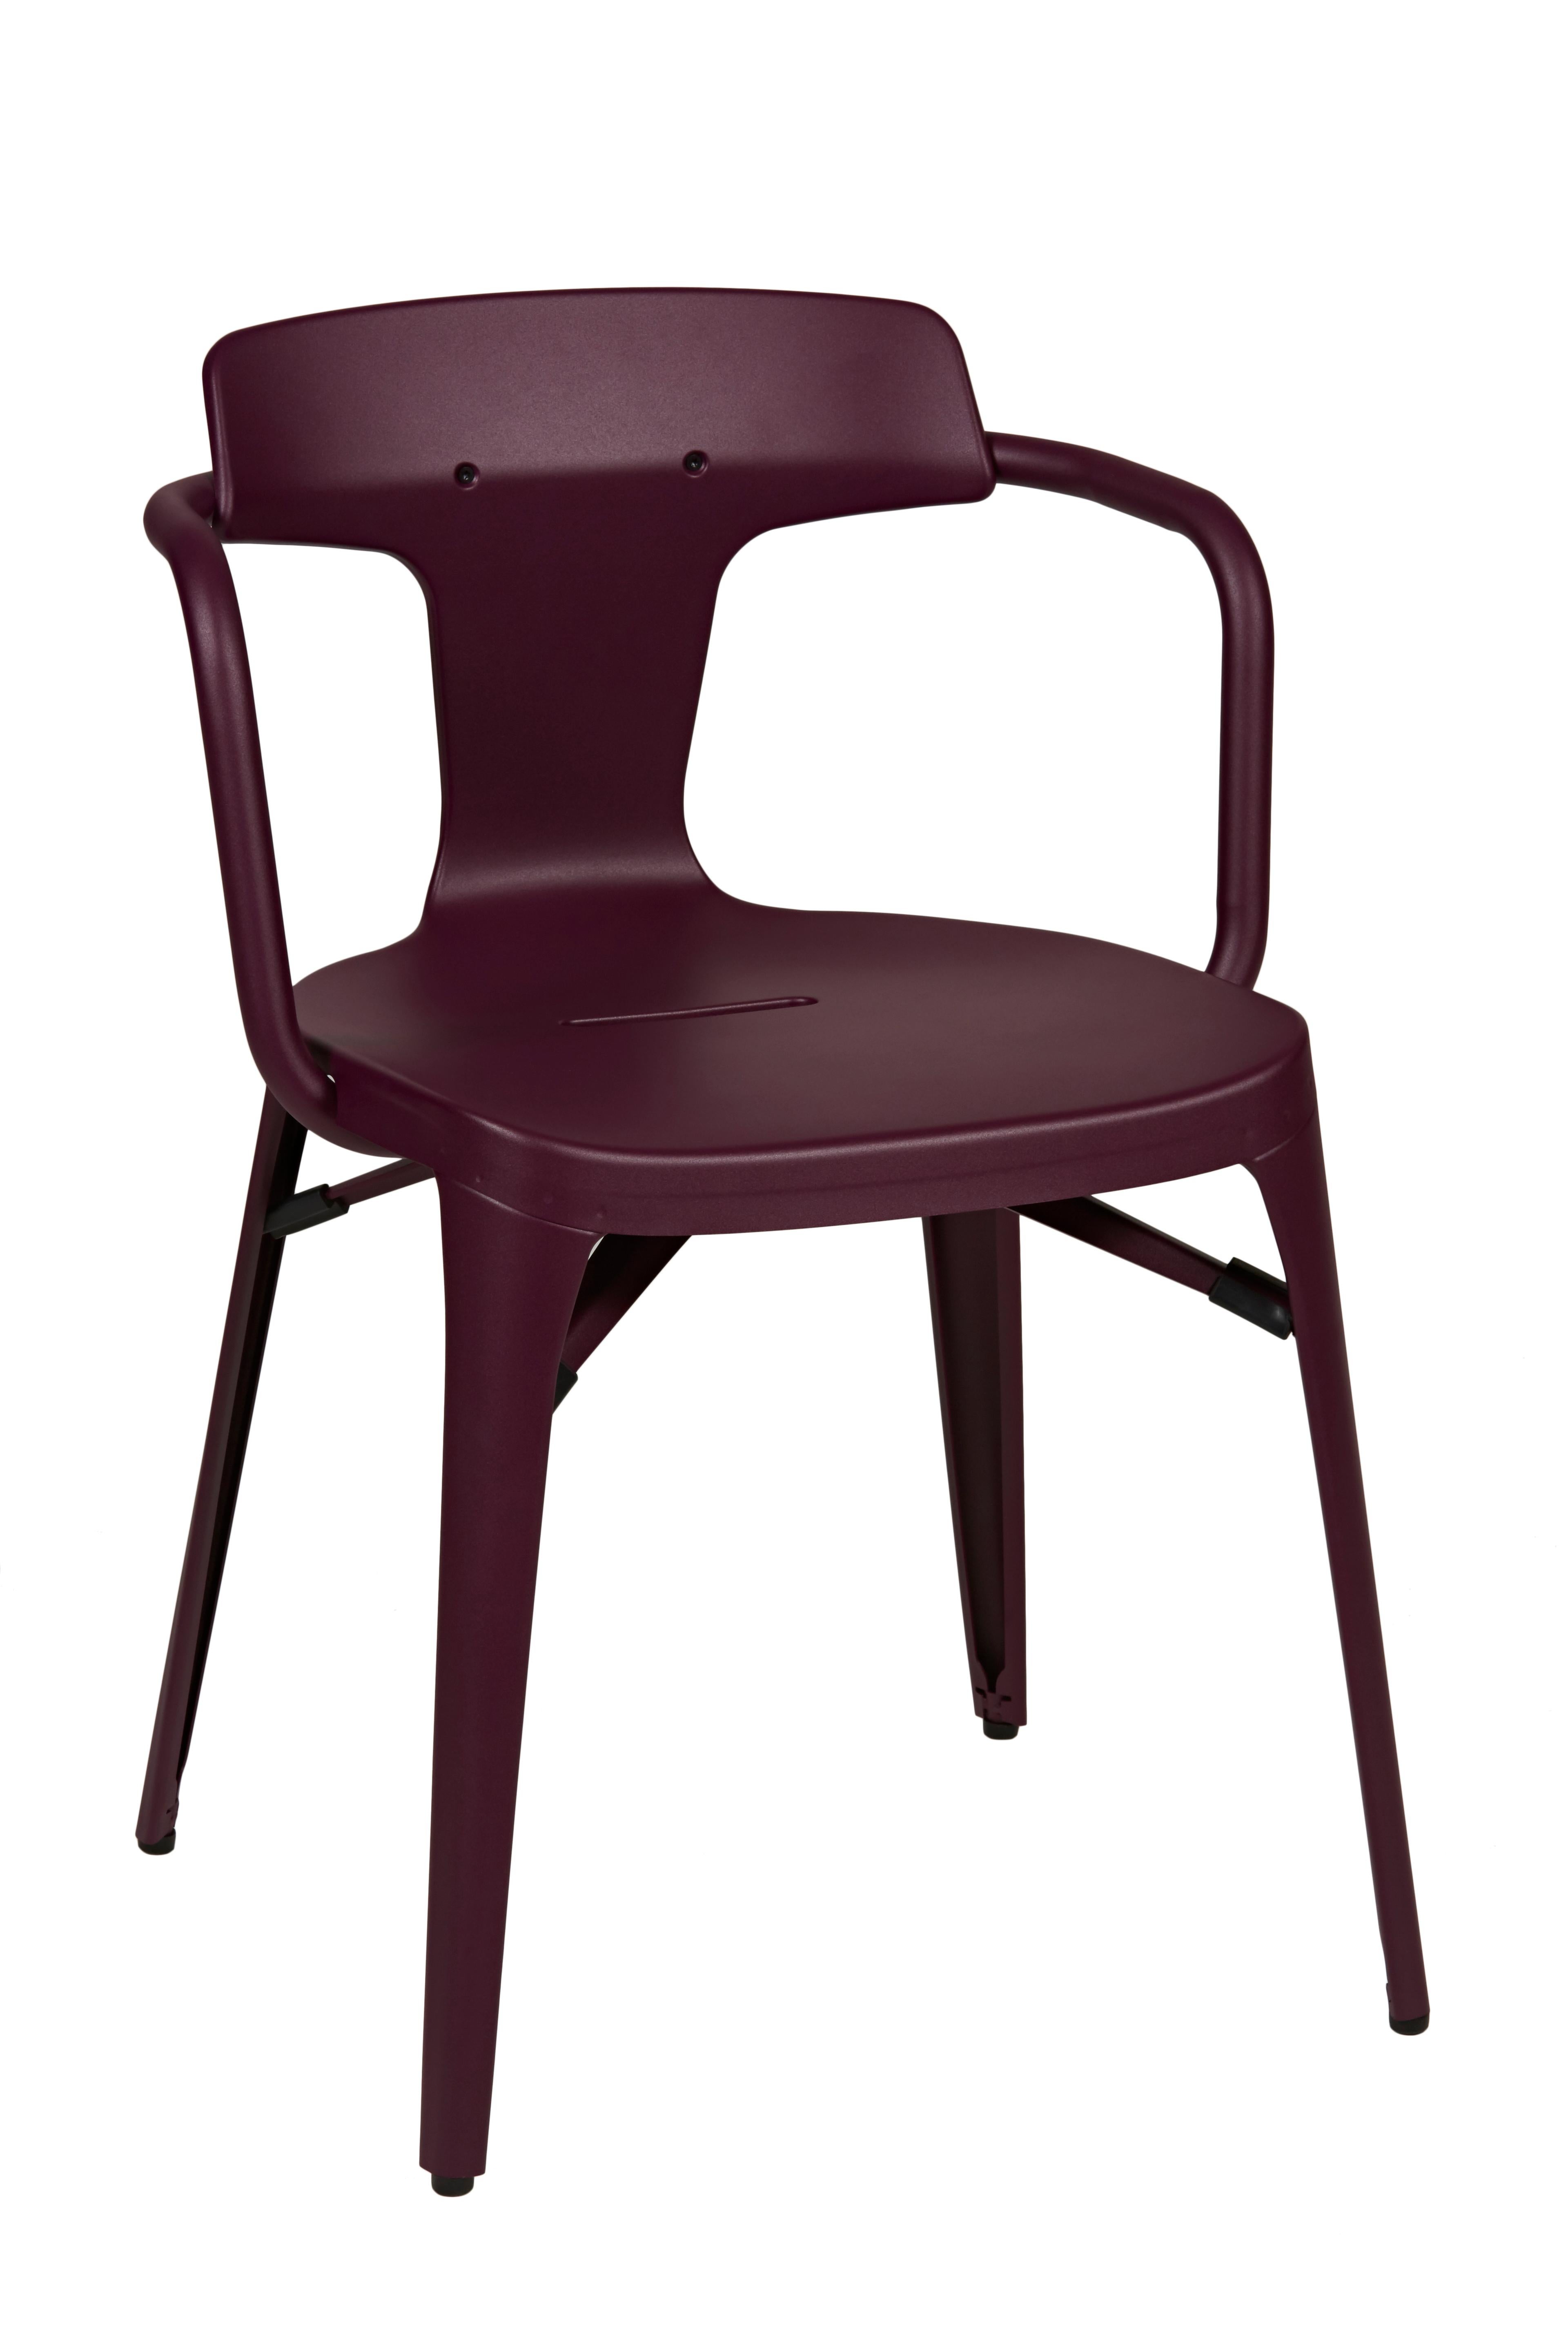 Im Angebot: T14 Chair in Pop Colors by Patrick Norguet and Tolix, Purple (Aubergine) 4